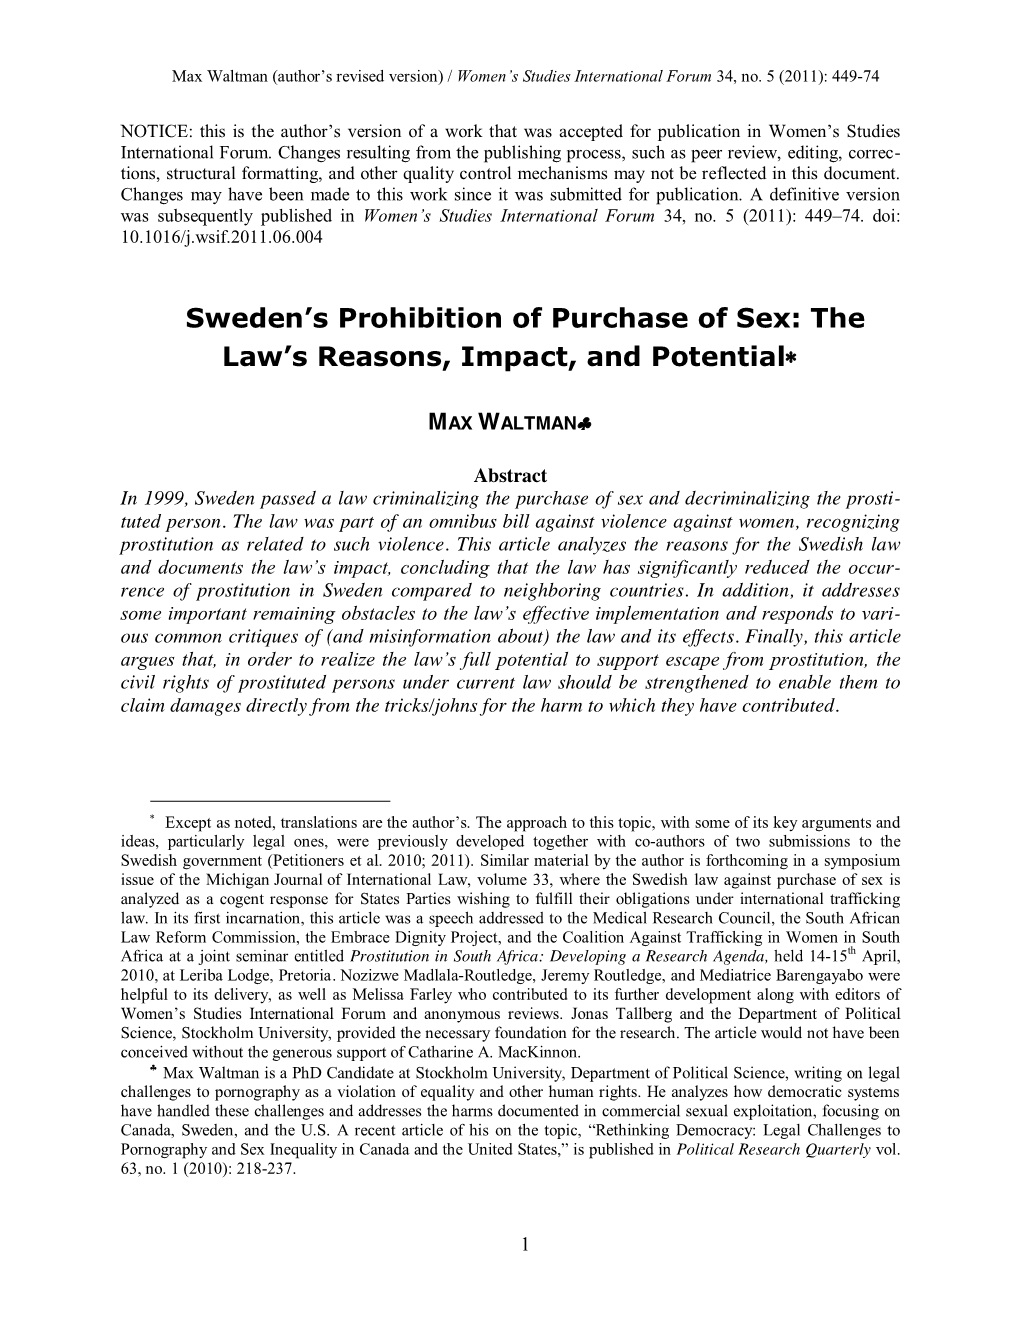 Sweden's Prohibition of Purchase of Sex- the Law's Reasons, Impact, And